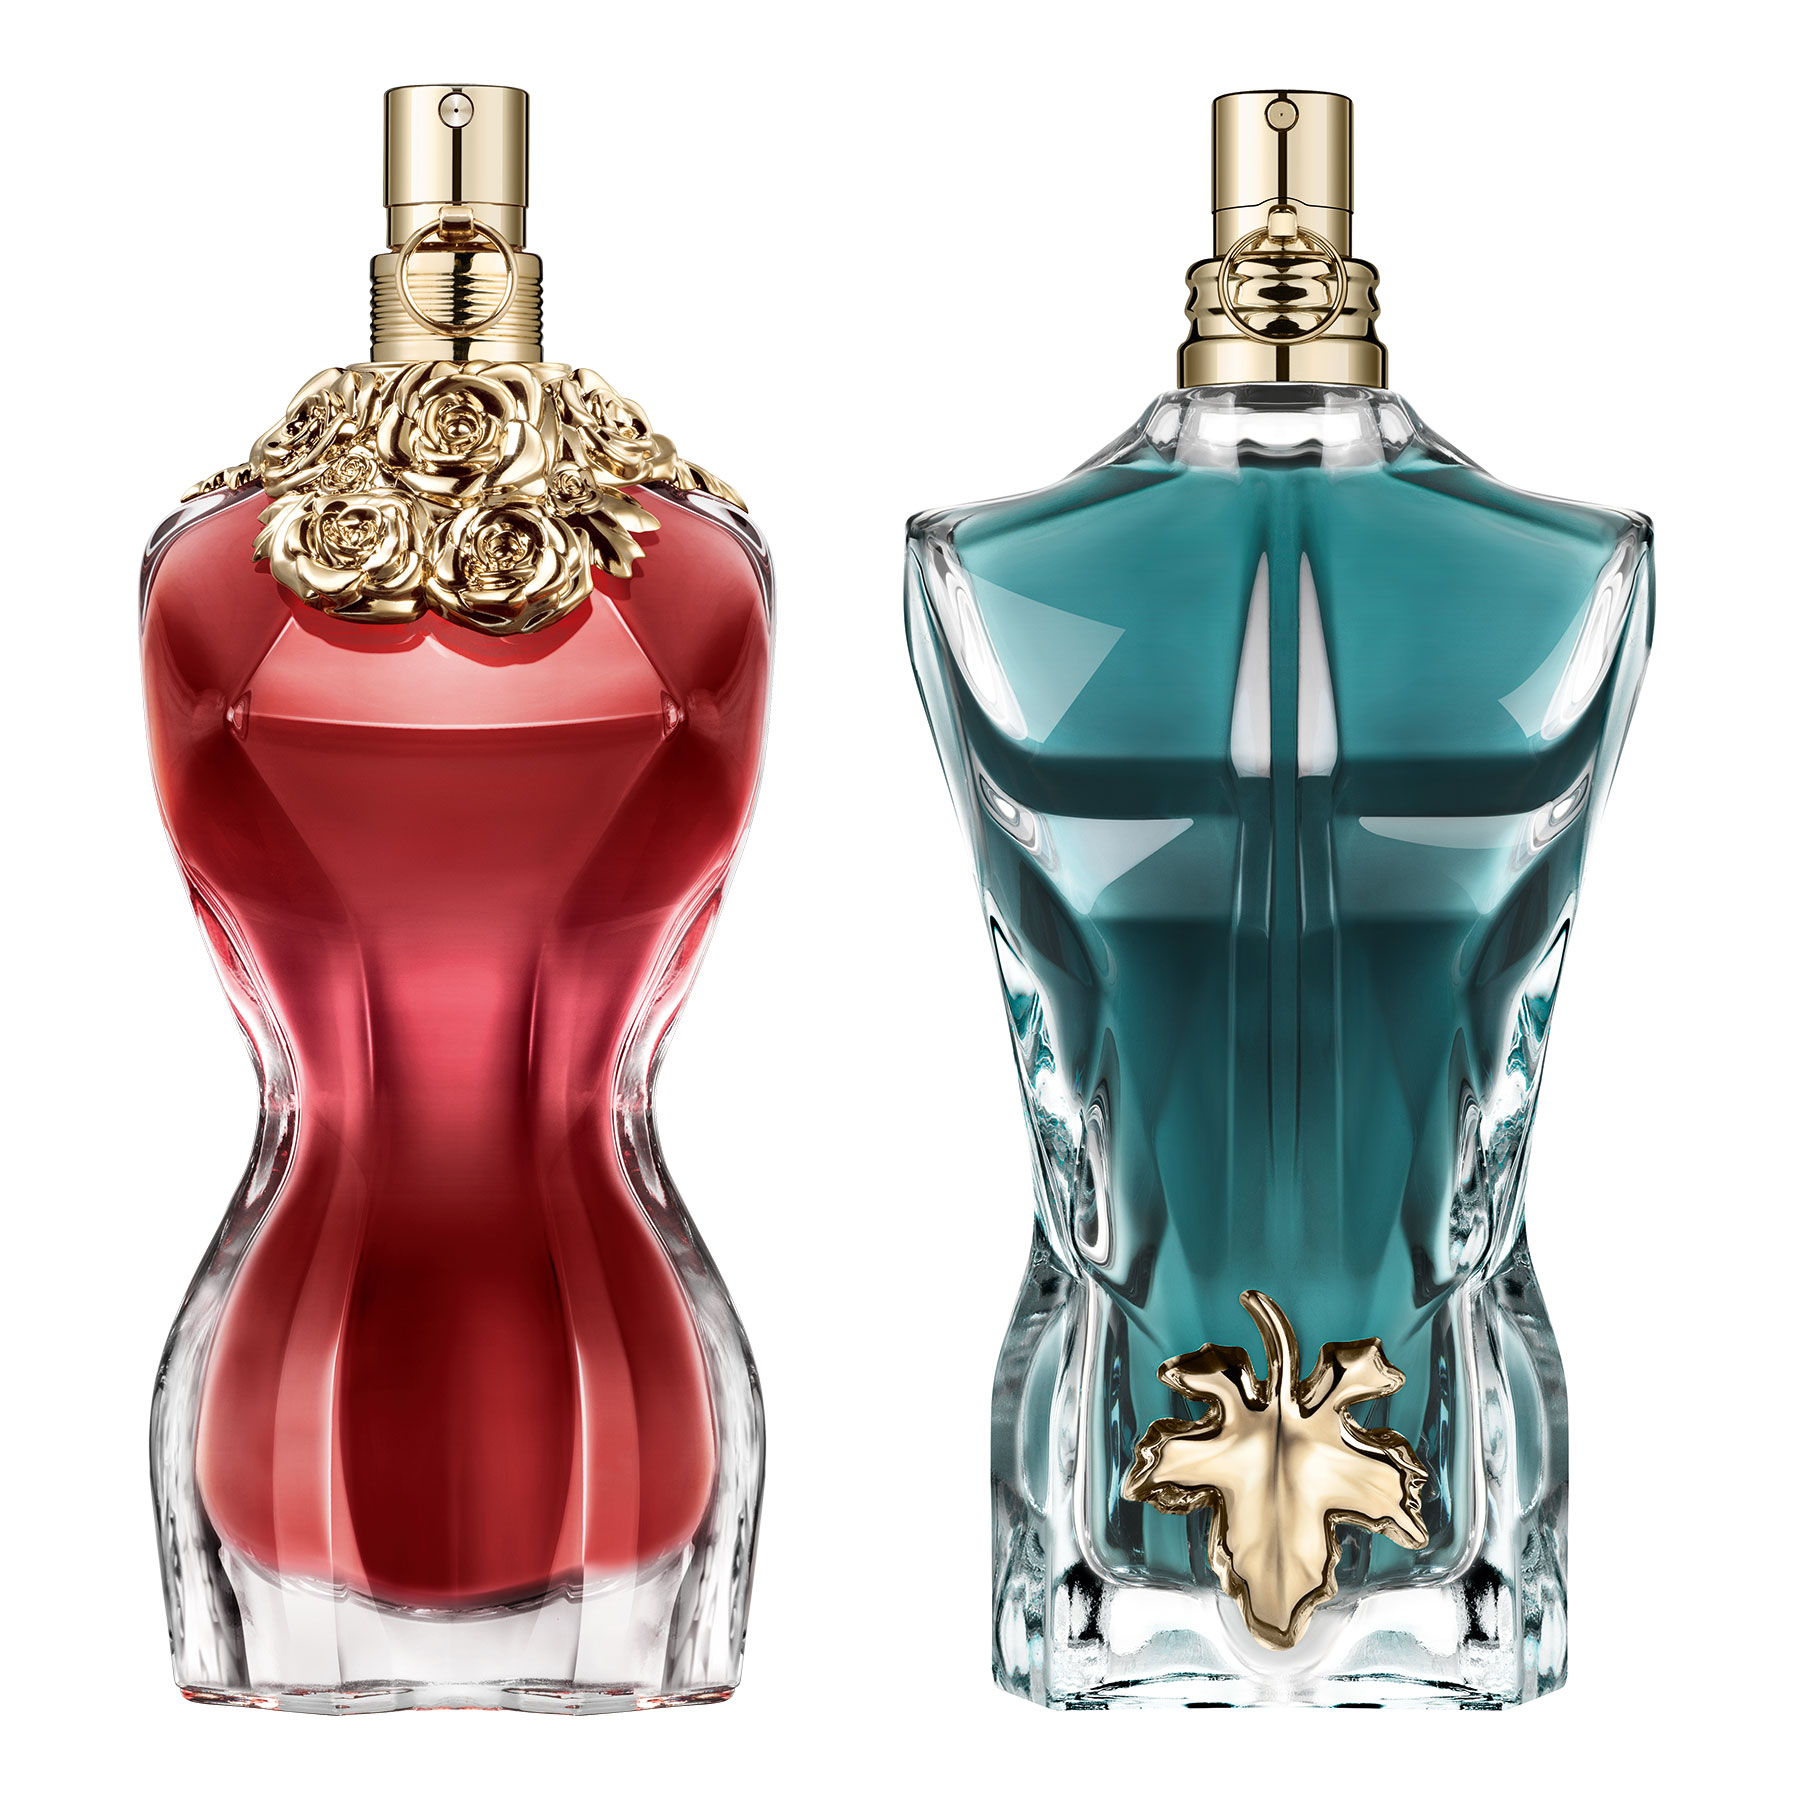 perfume for her and him